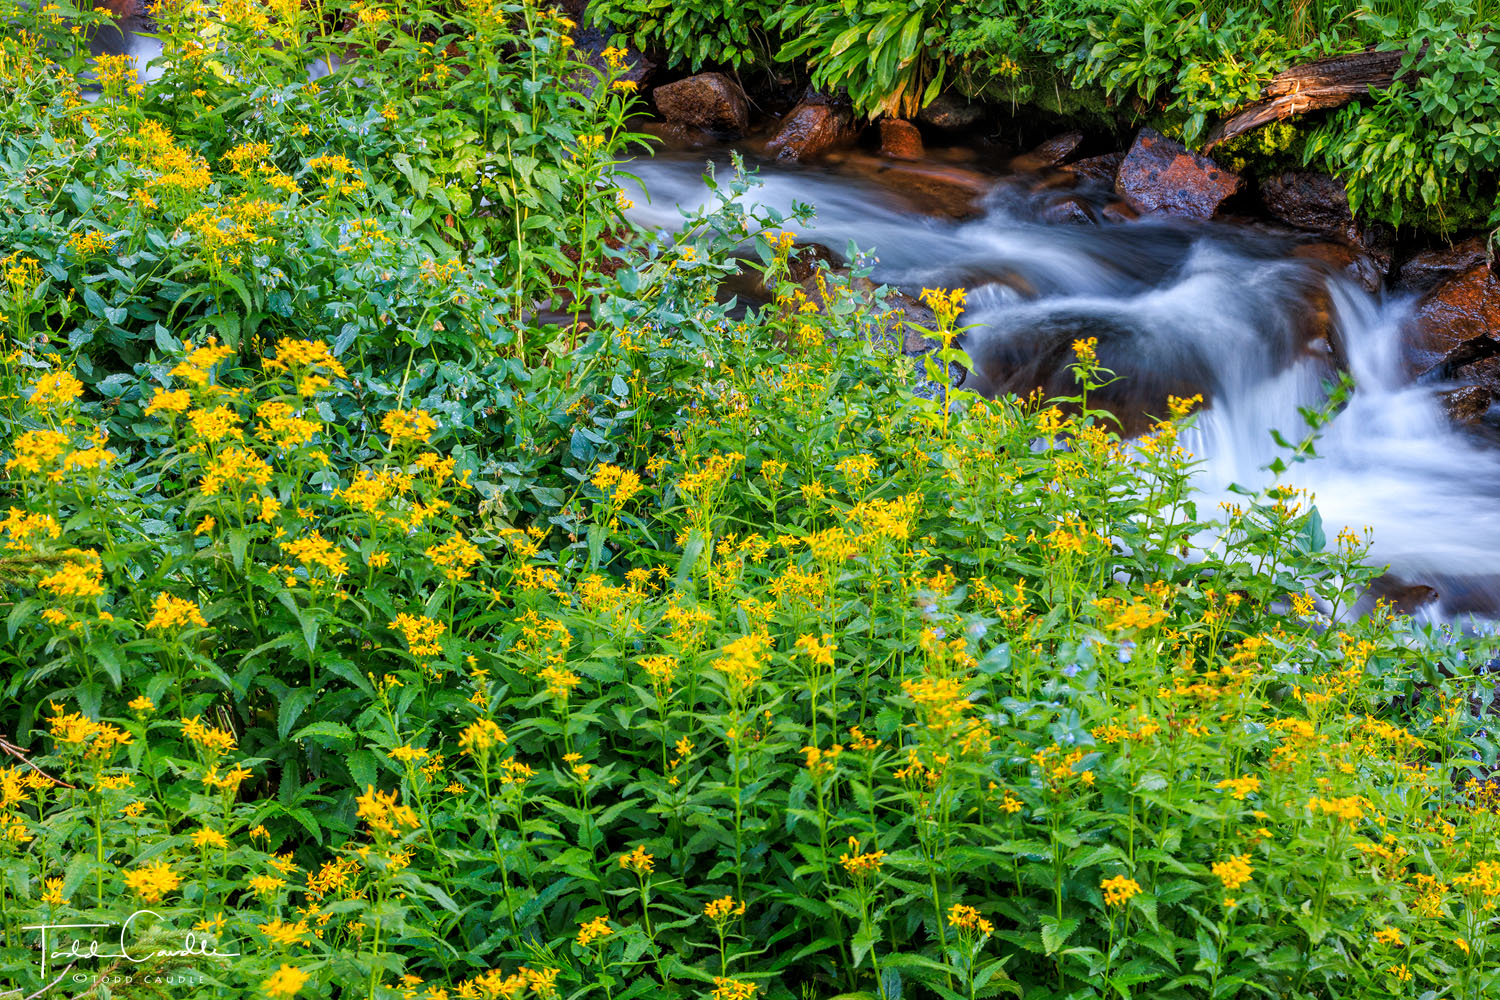 Arrowleaf groundsel and chiming bells grow along Mitchell Creek just below Mitchell Lake.